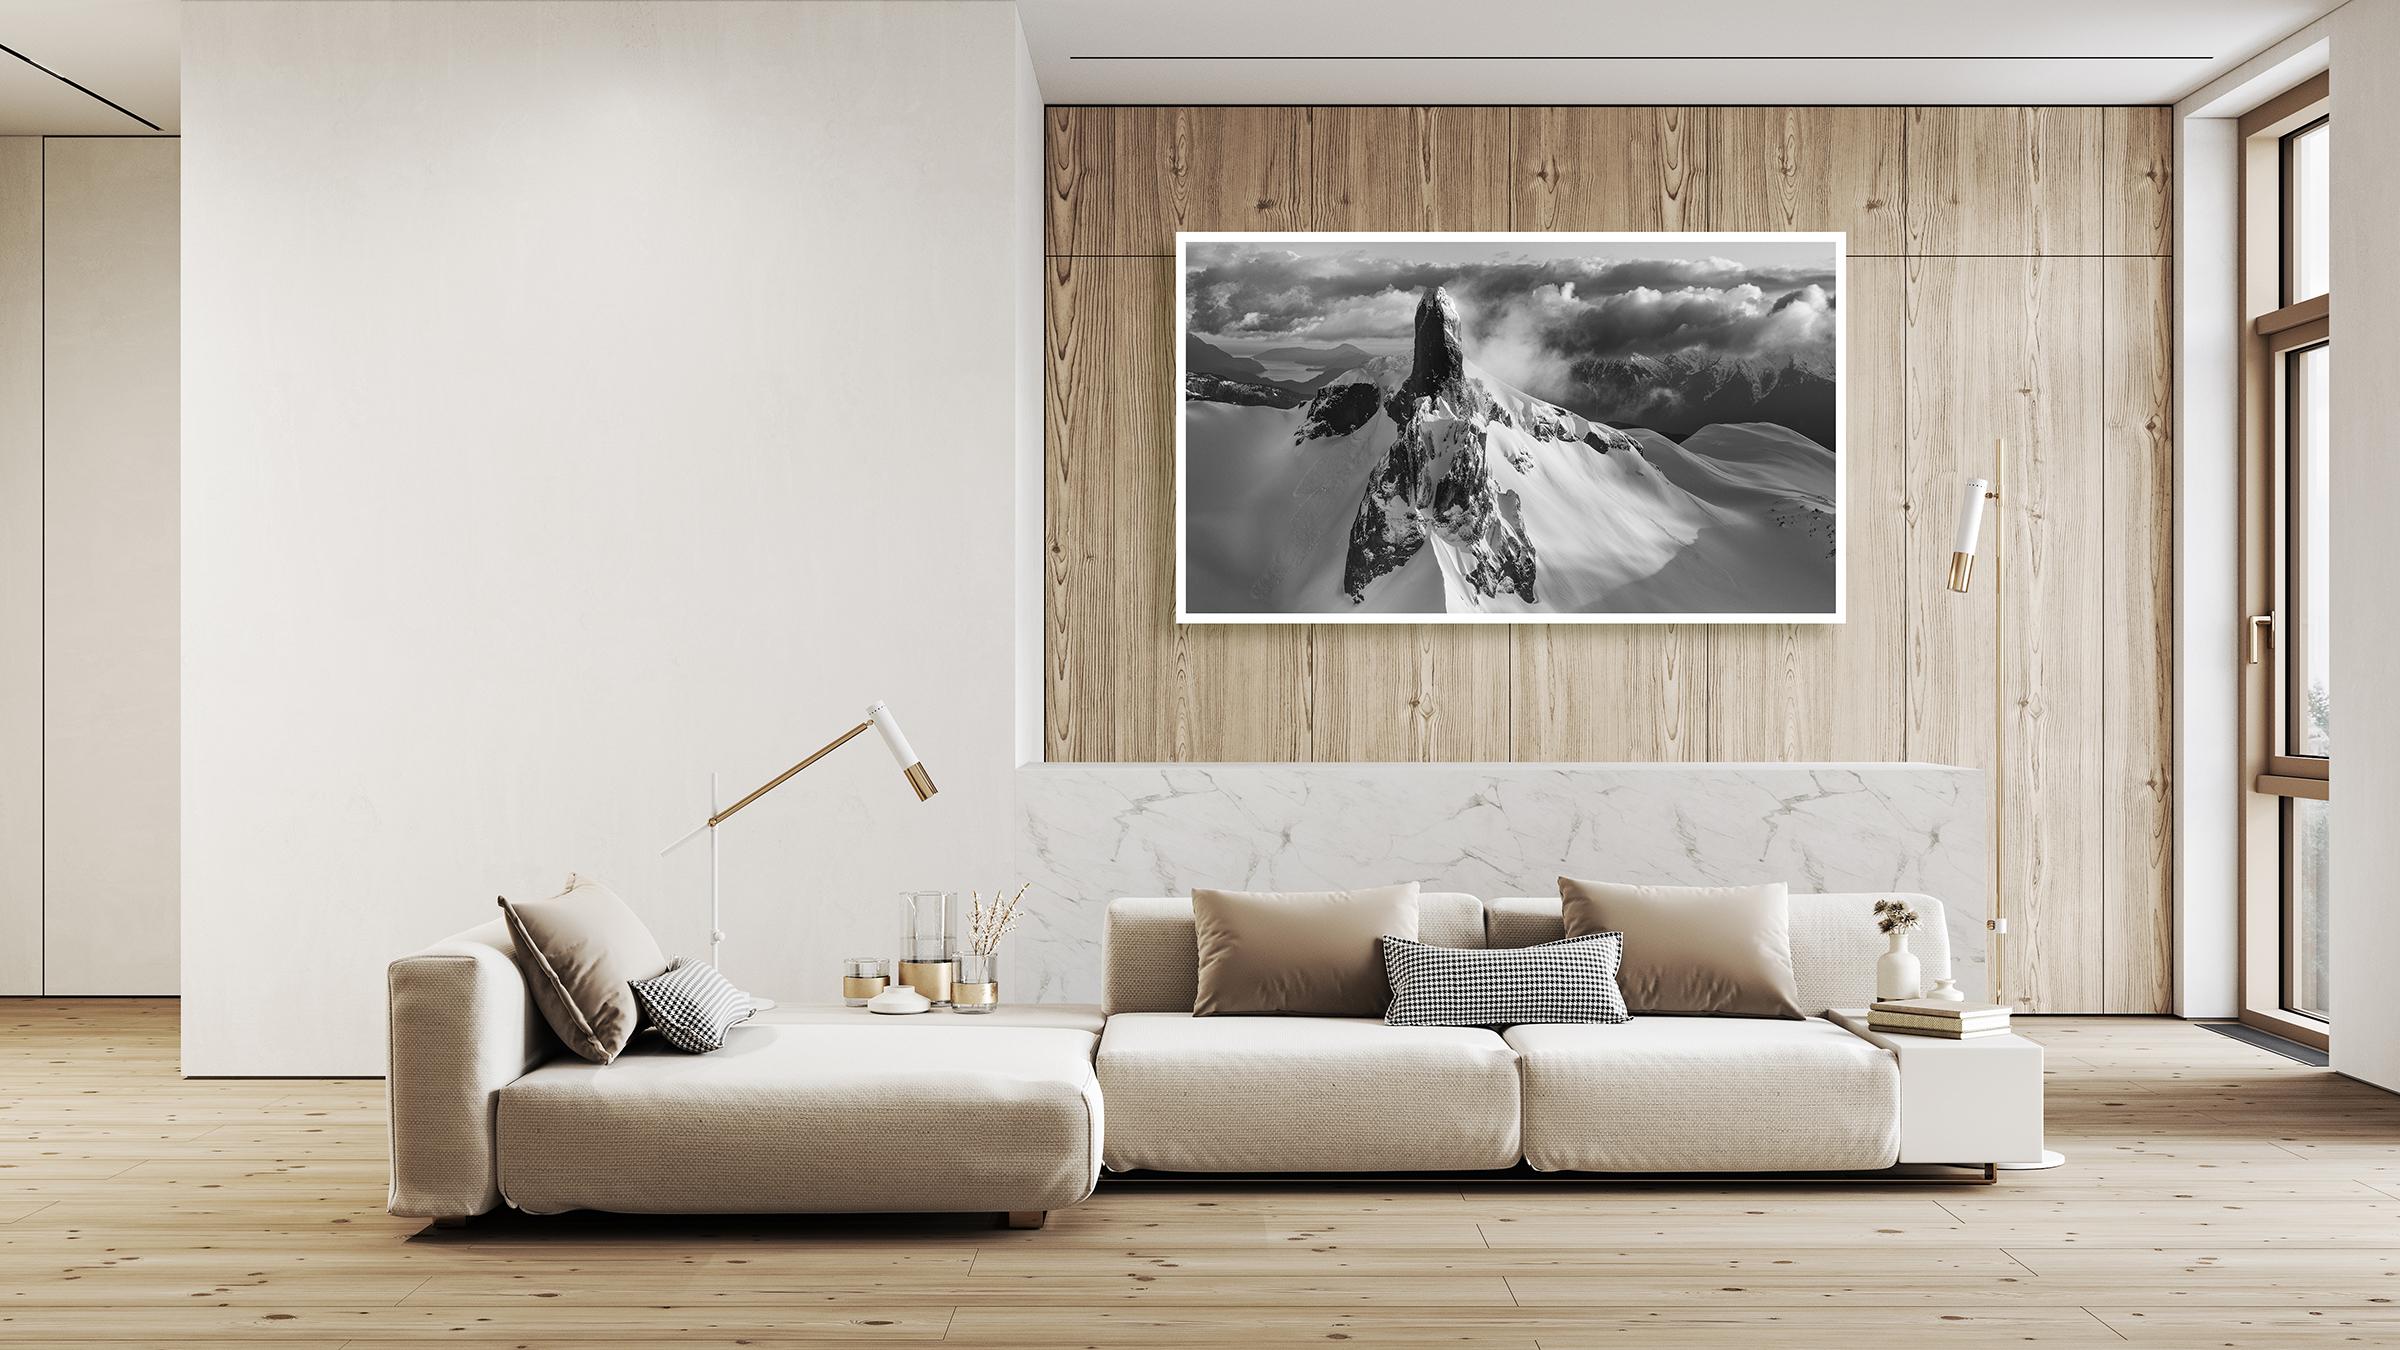 Black Tusk #50, Whistler, black and white, contemporary, landscape photograph For Sale 2